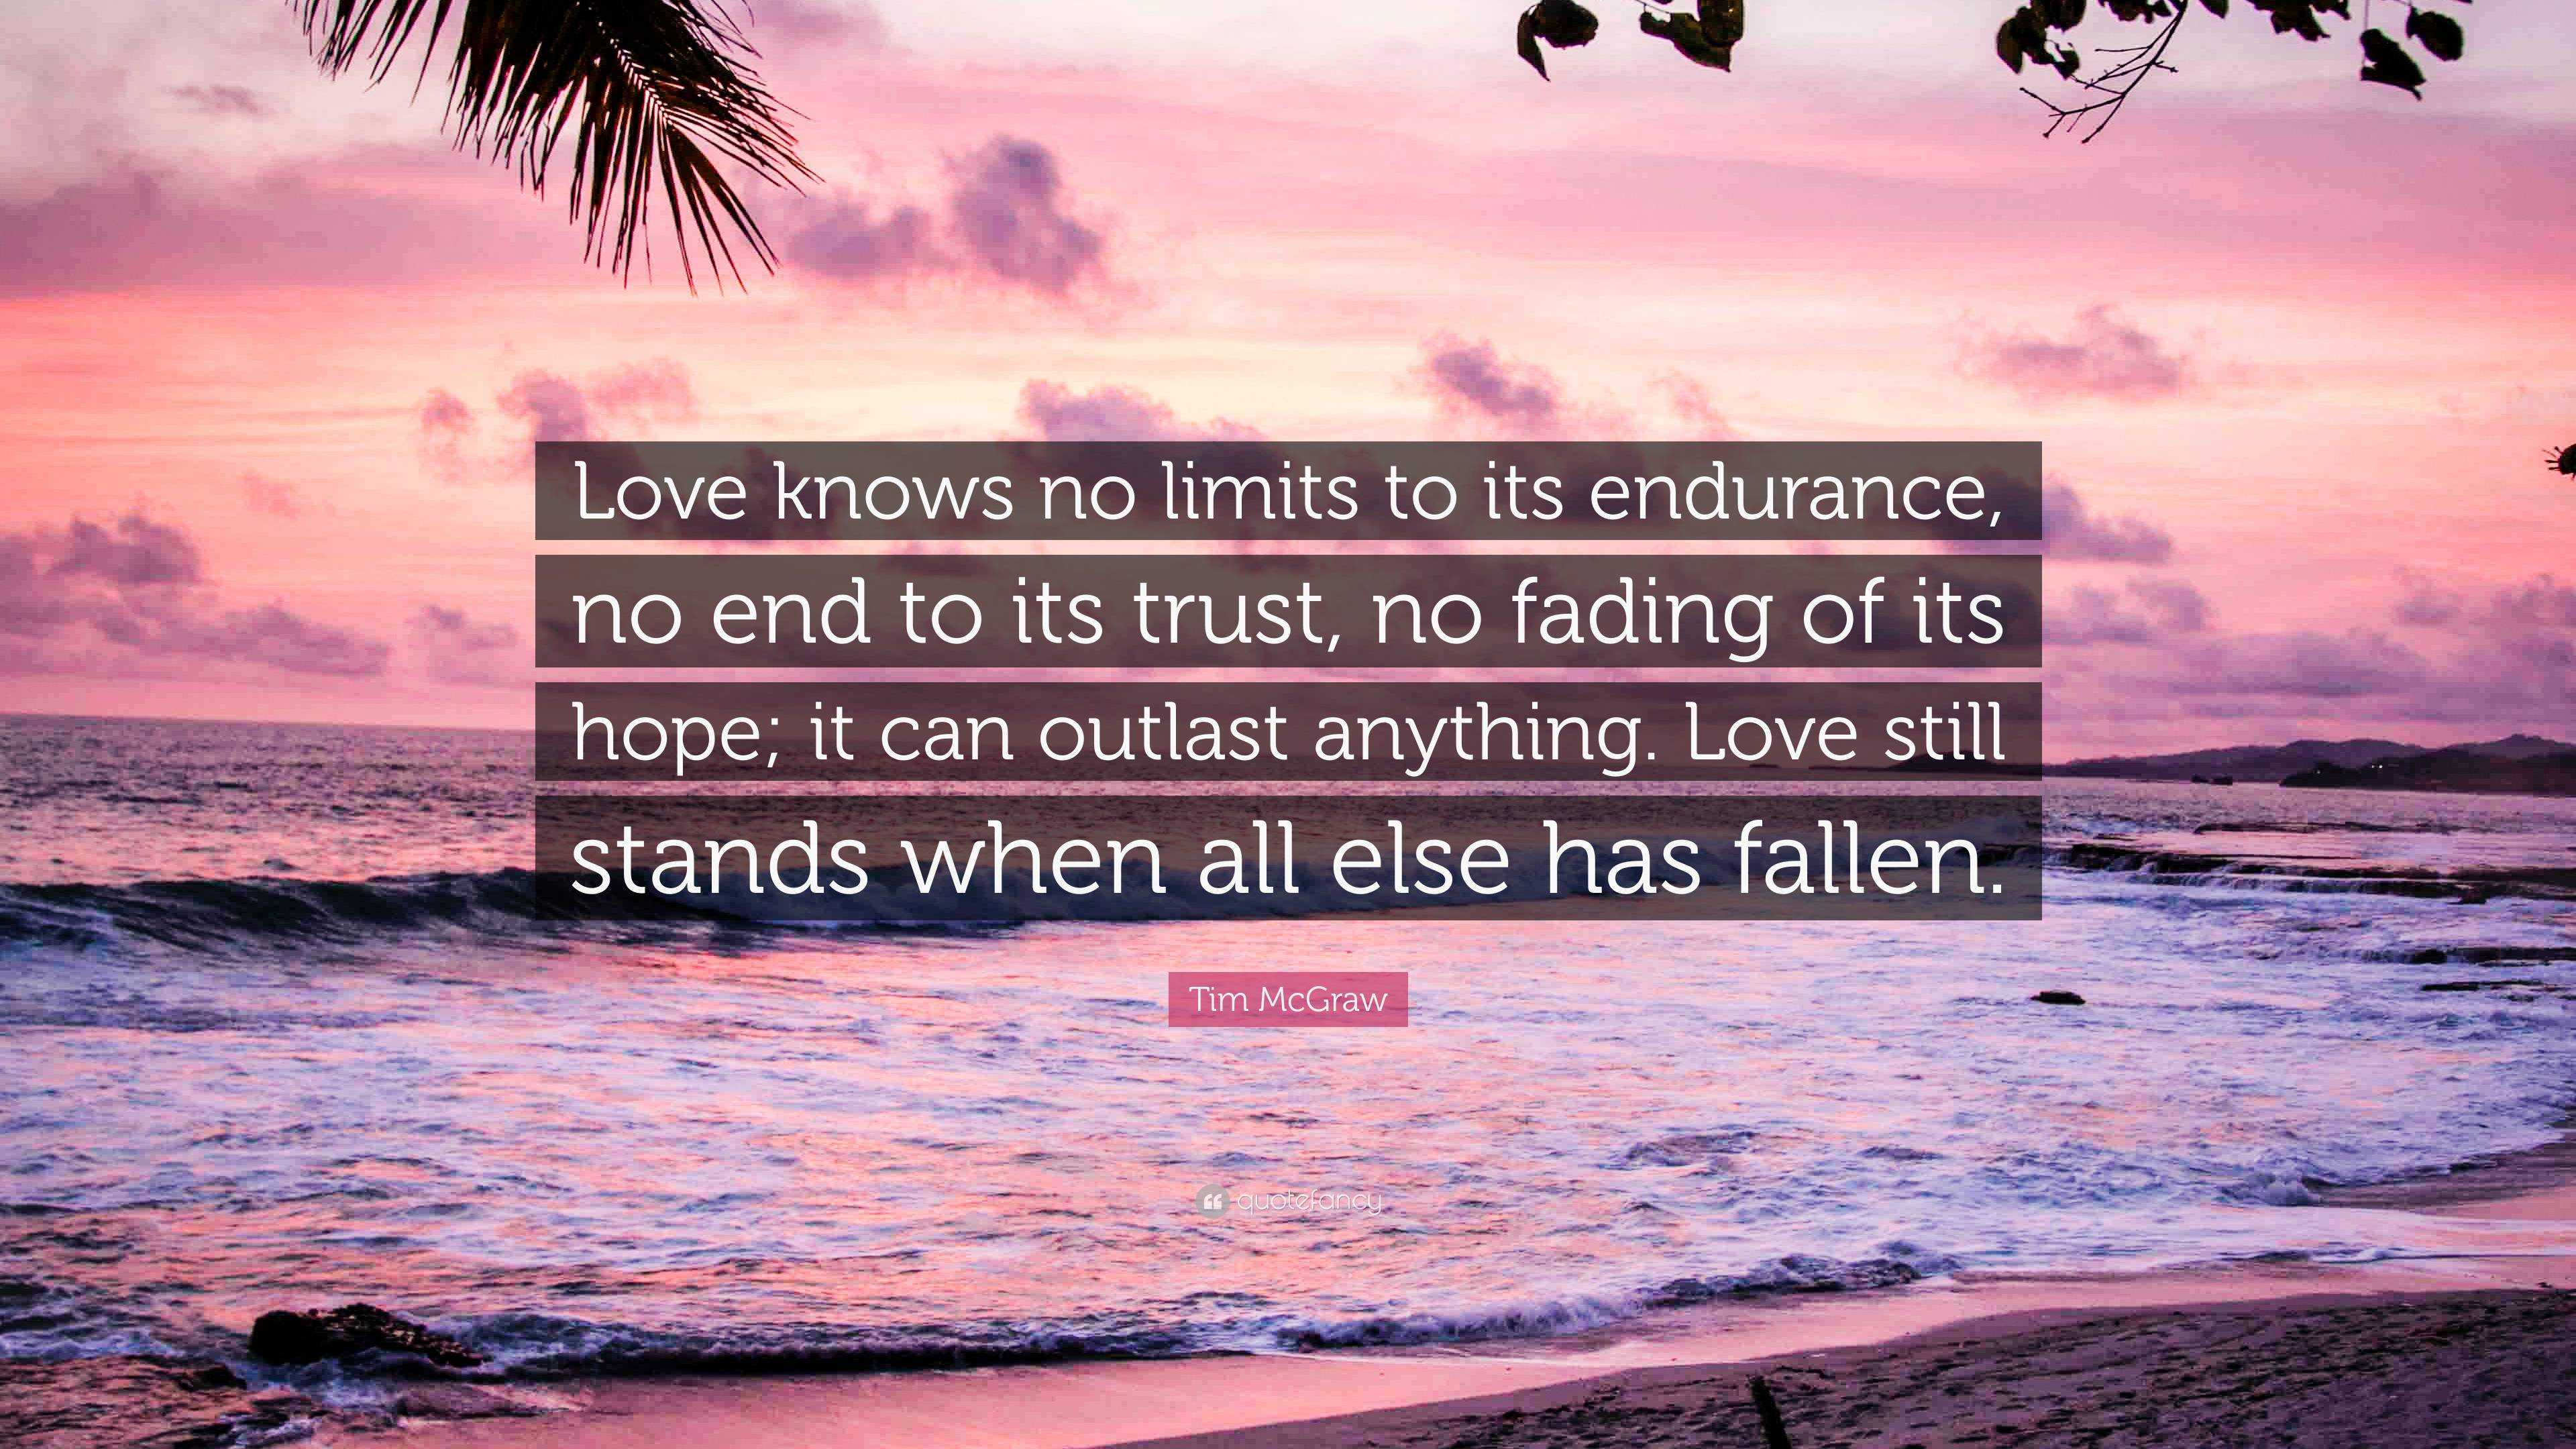 Tim McGraw Quote: “Love knows no limits to its endurance, no end to its ...